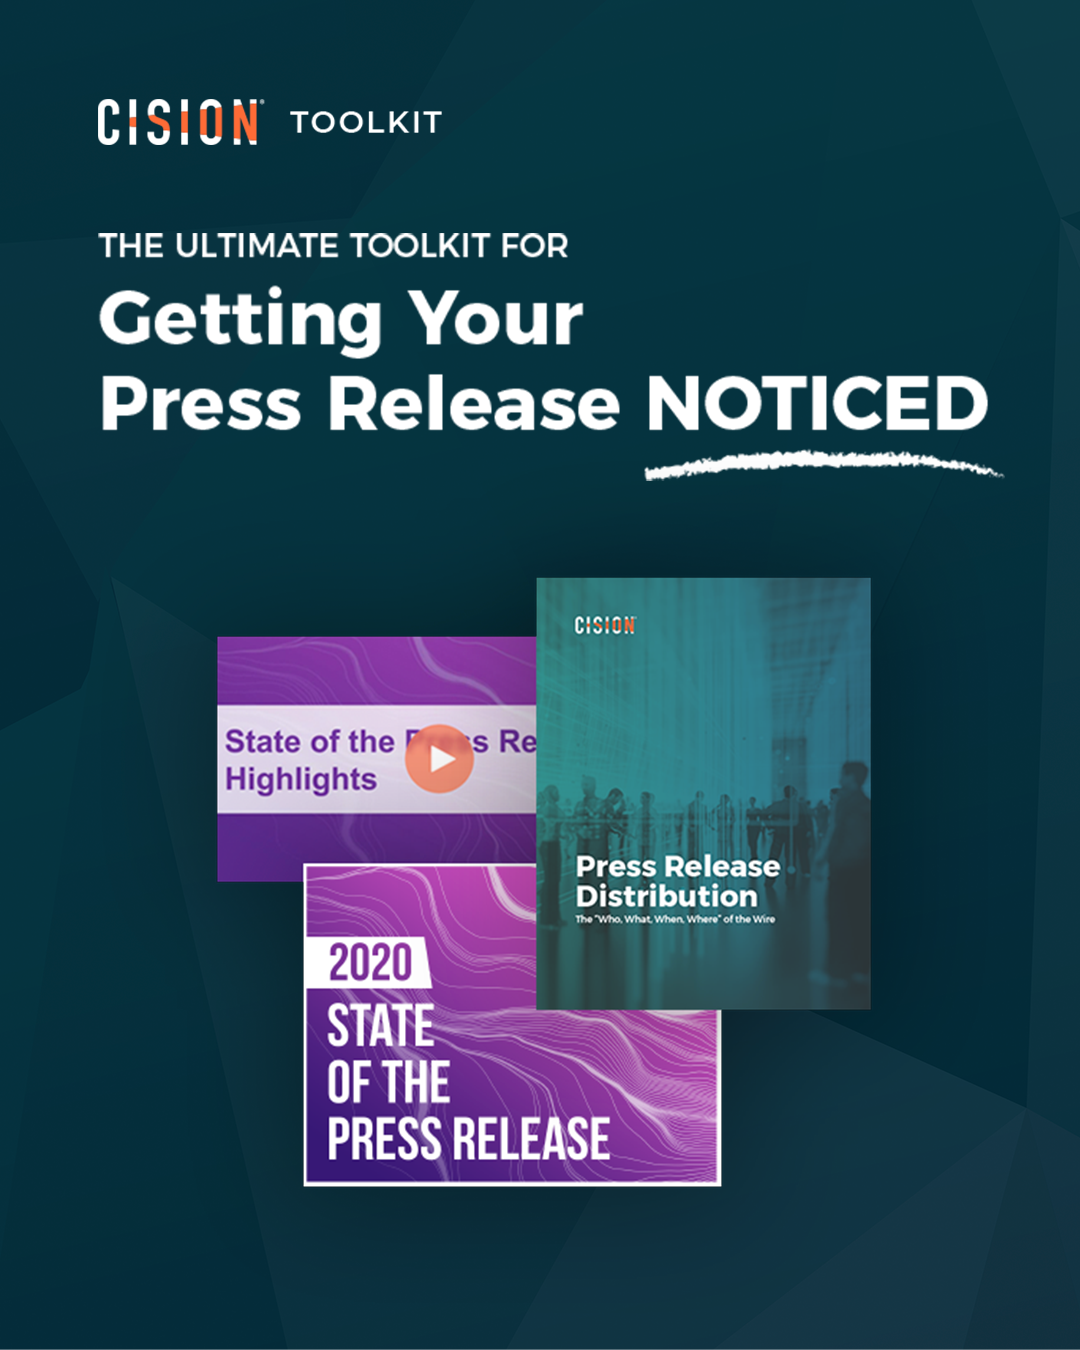 The Ultimate Toolkit for Getting Your Press Release Noticed